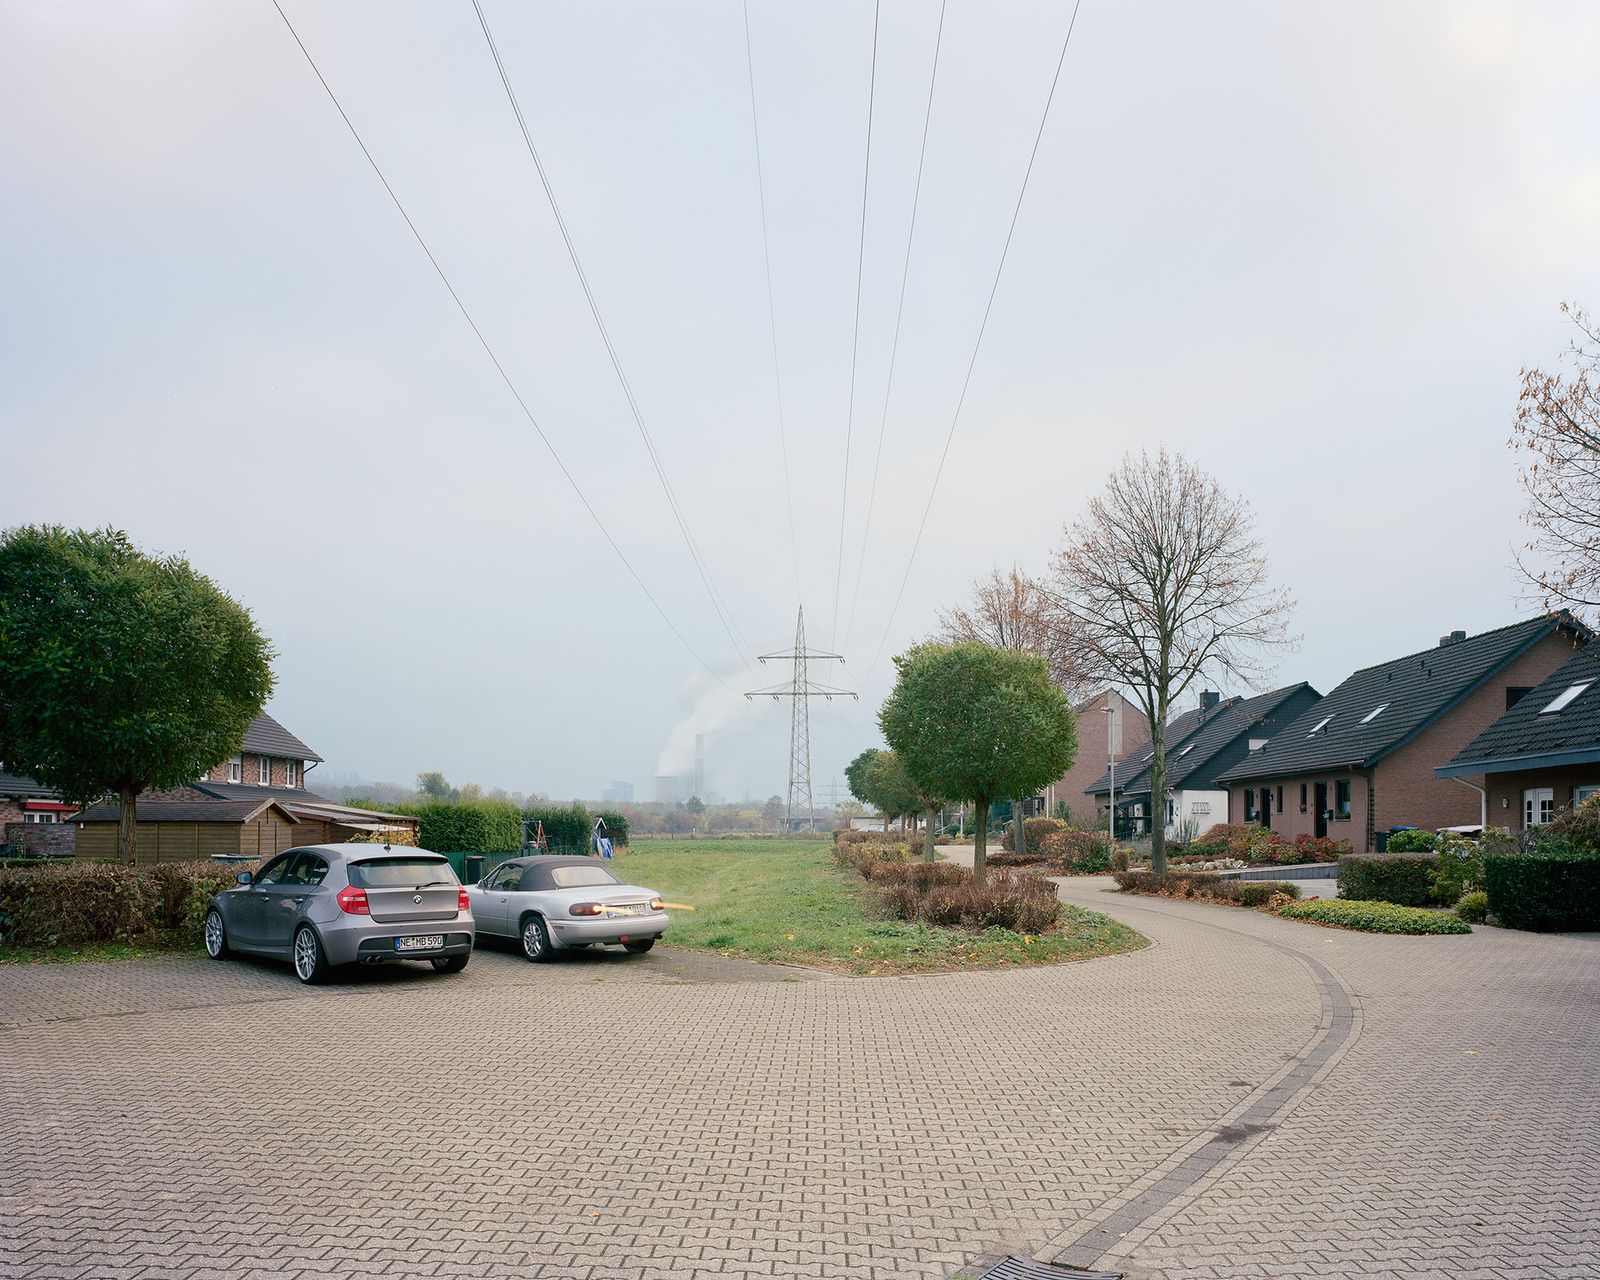 © Pietro Viti - Residential area in Grevenbroich. A large part of the local population works in the lignite market.